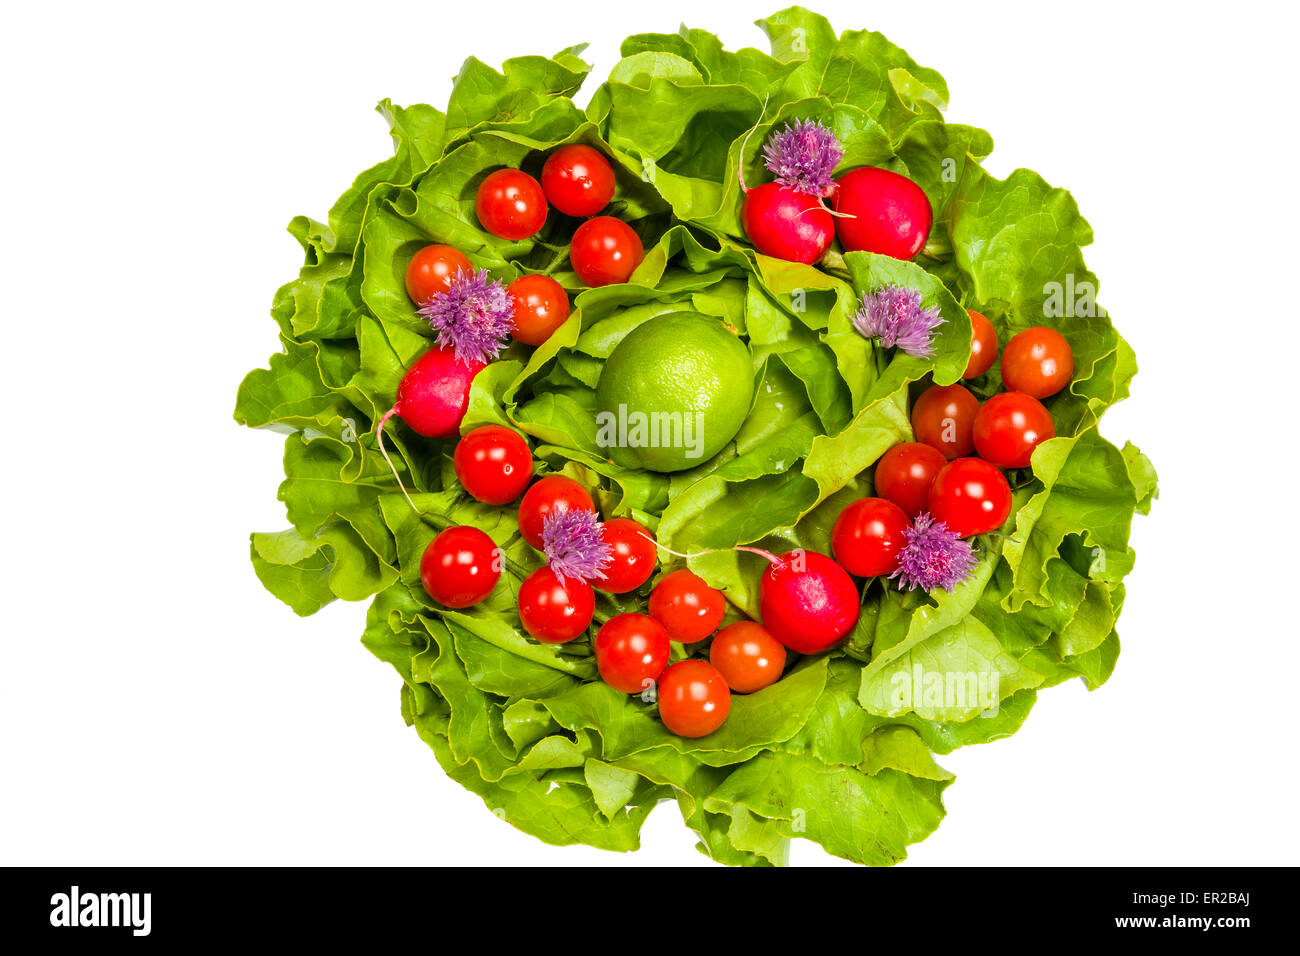 Lettuce, radishes, chives, lime and cherry tomatoes Stock Photo